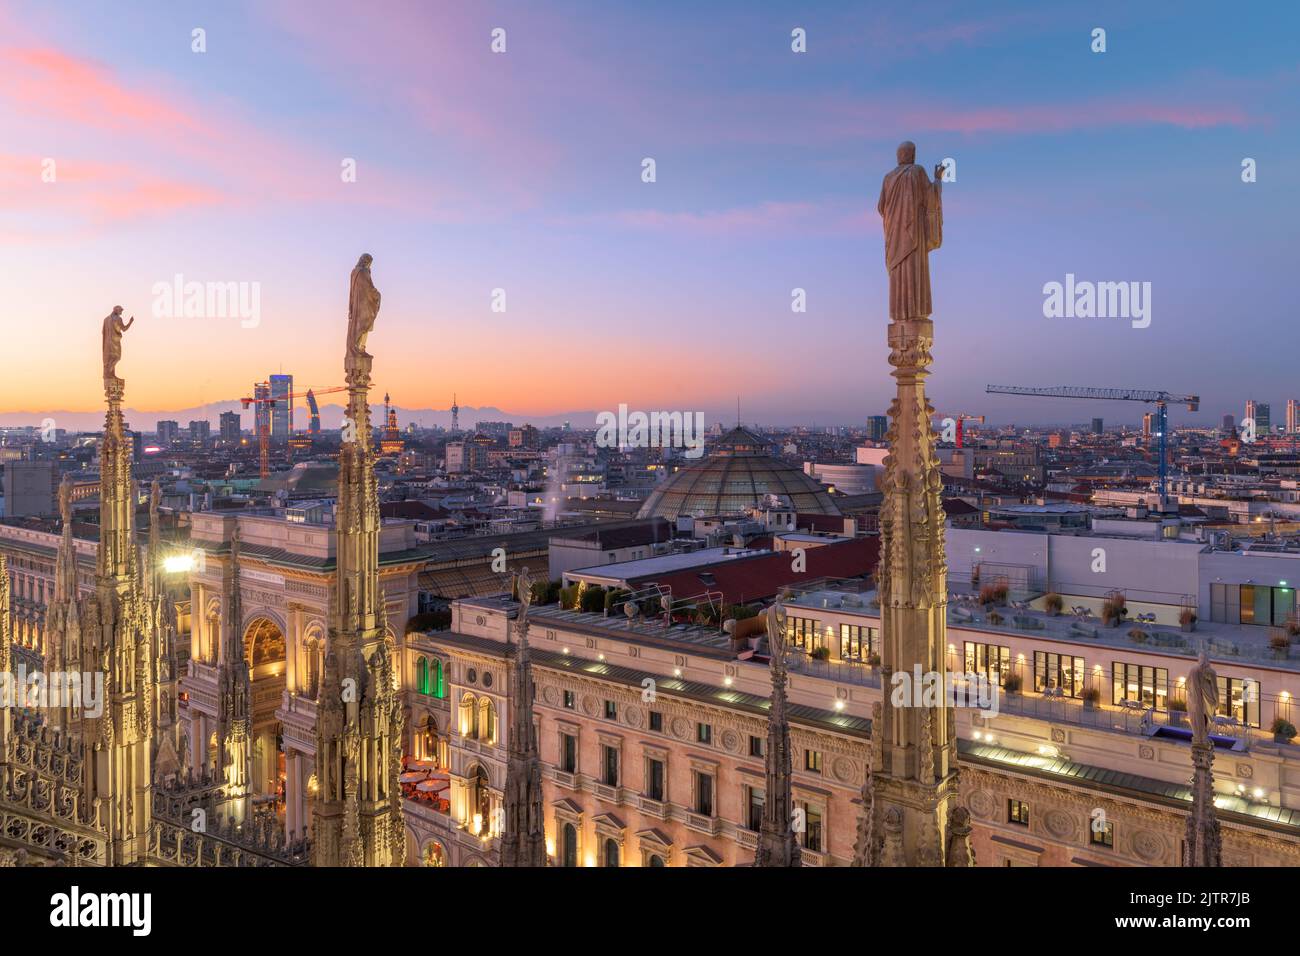 Milan, Italy city skyline from above in the evening. Stock Photo